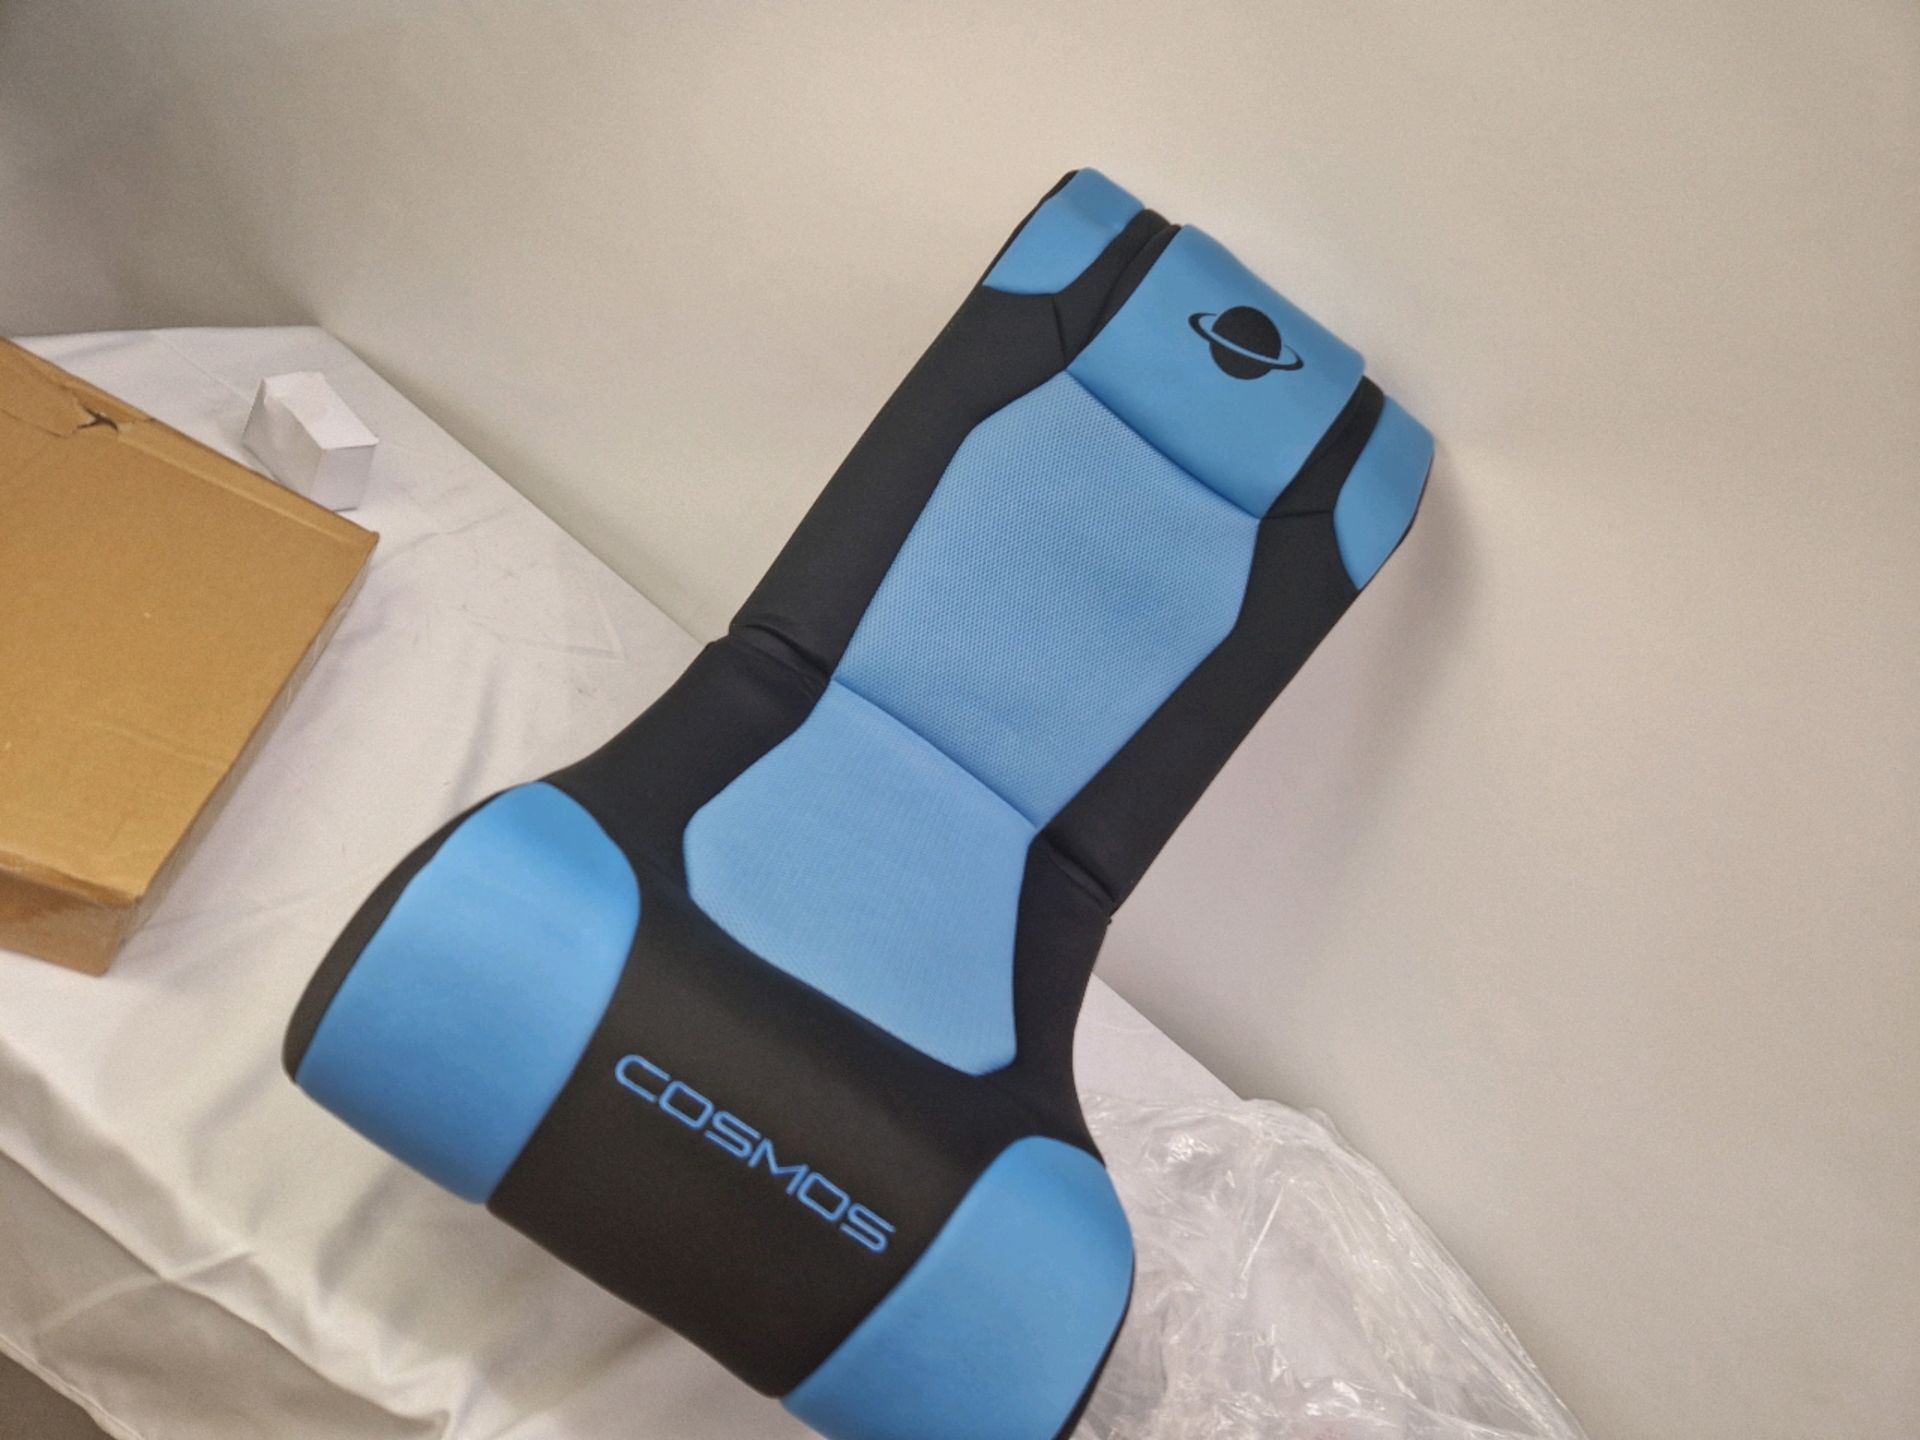 COSMOS2.1TITANPEDESTAL GAMING CHAIR BLUE - Image 2 of 5